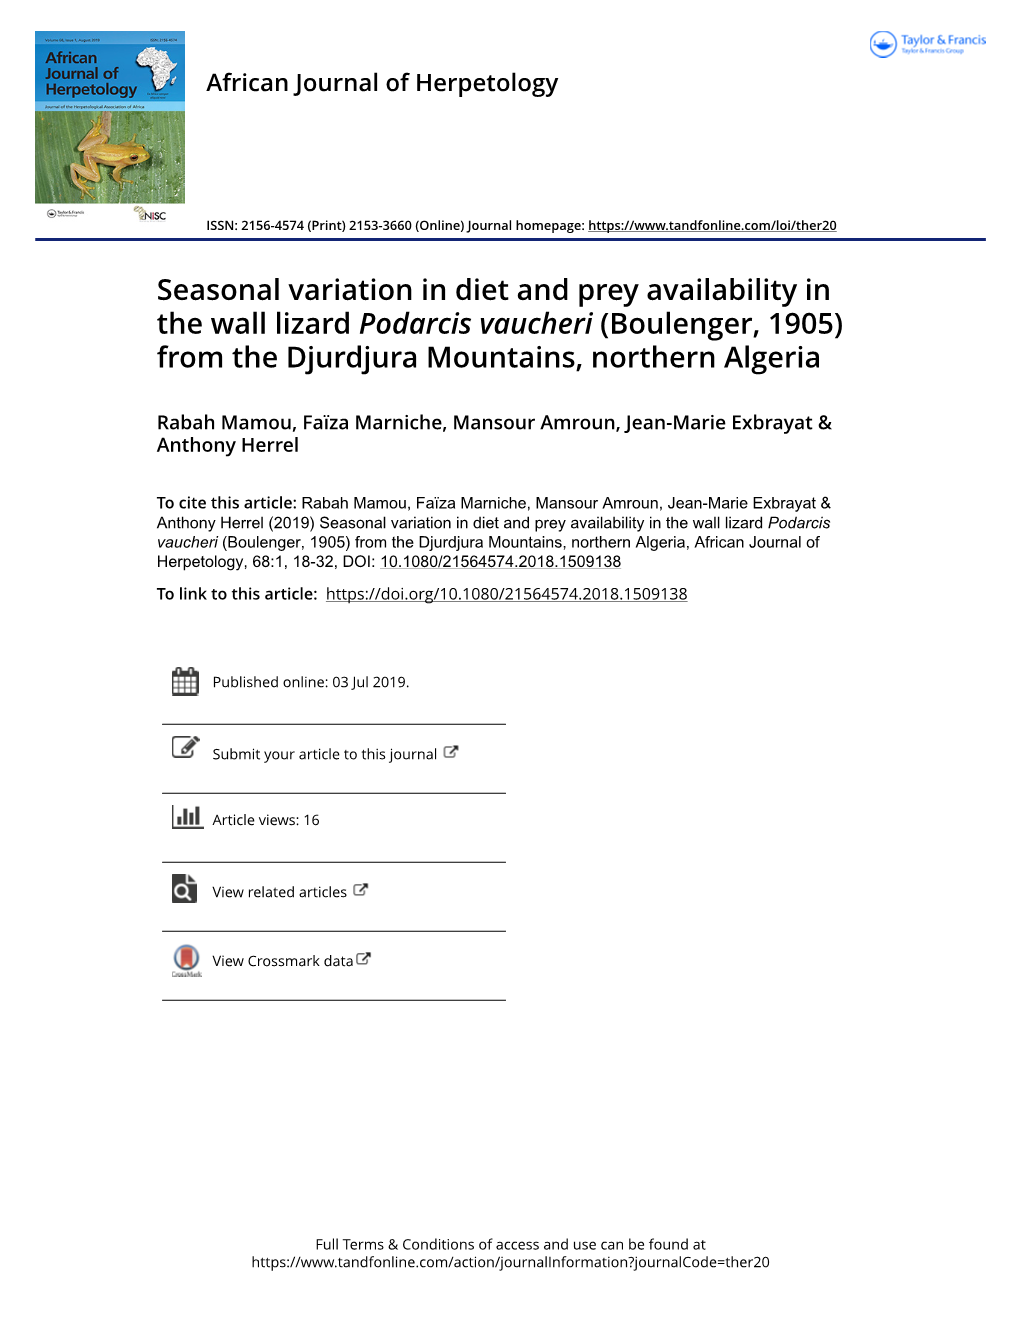 Seasonal Variation in Diet and Prey Availability in the Wall Lizard Podarcis Vaucheri (Boulenger, 1905) from the Djurdjura Mountains, Northern Algeria